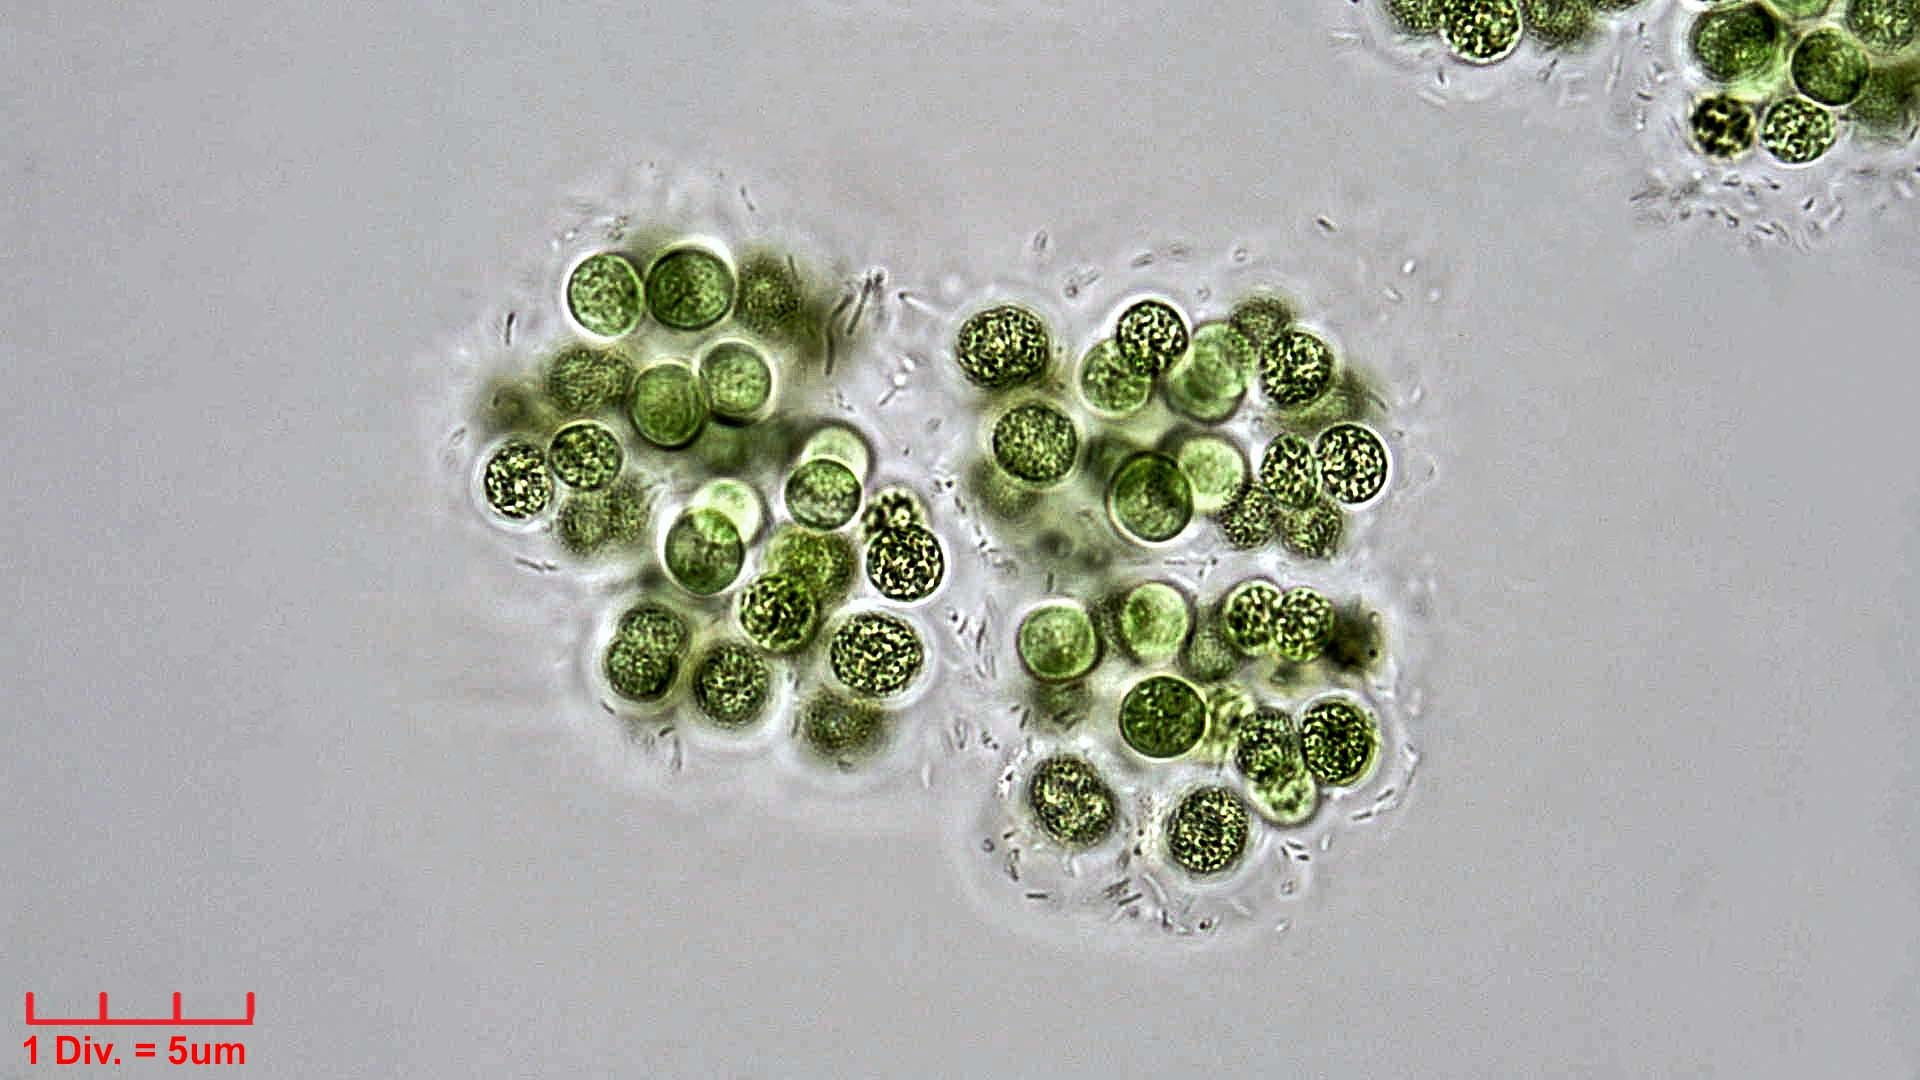 ././Cyanobacteria/Chroococcales/Microcystaceae/Microcystis/viridis/microcystis-viridis-68.jpg